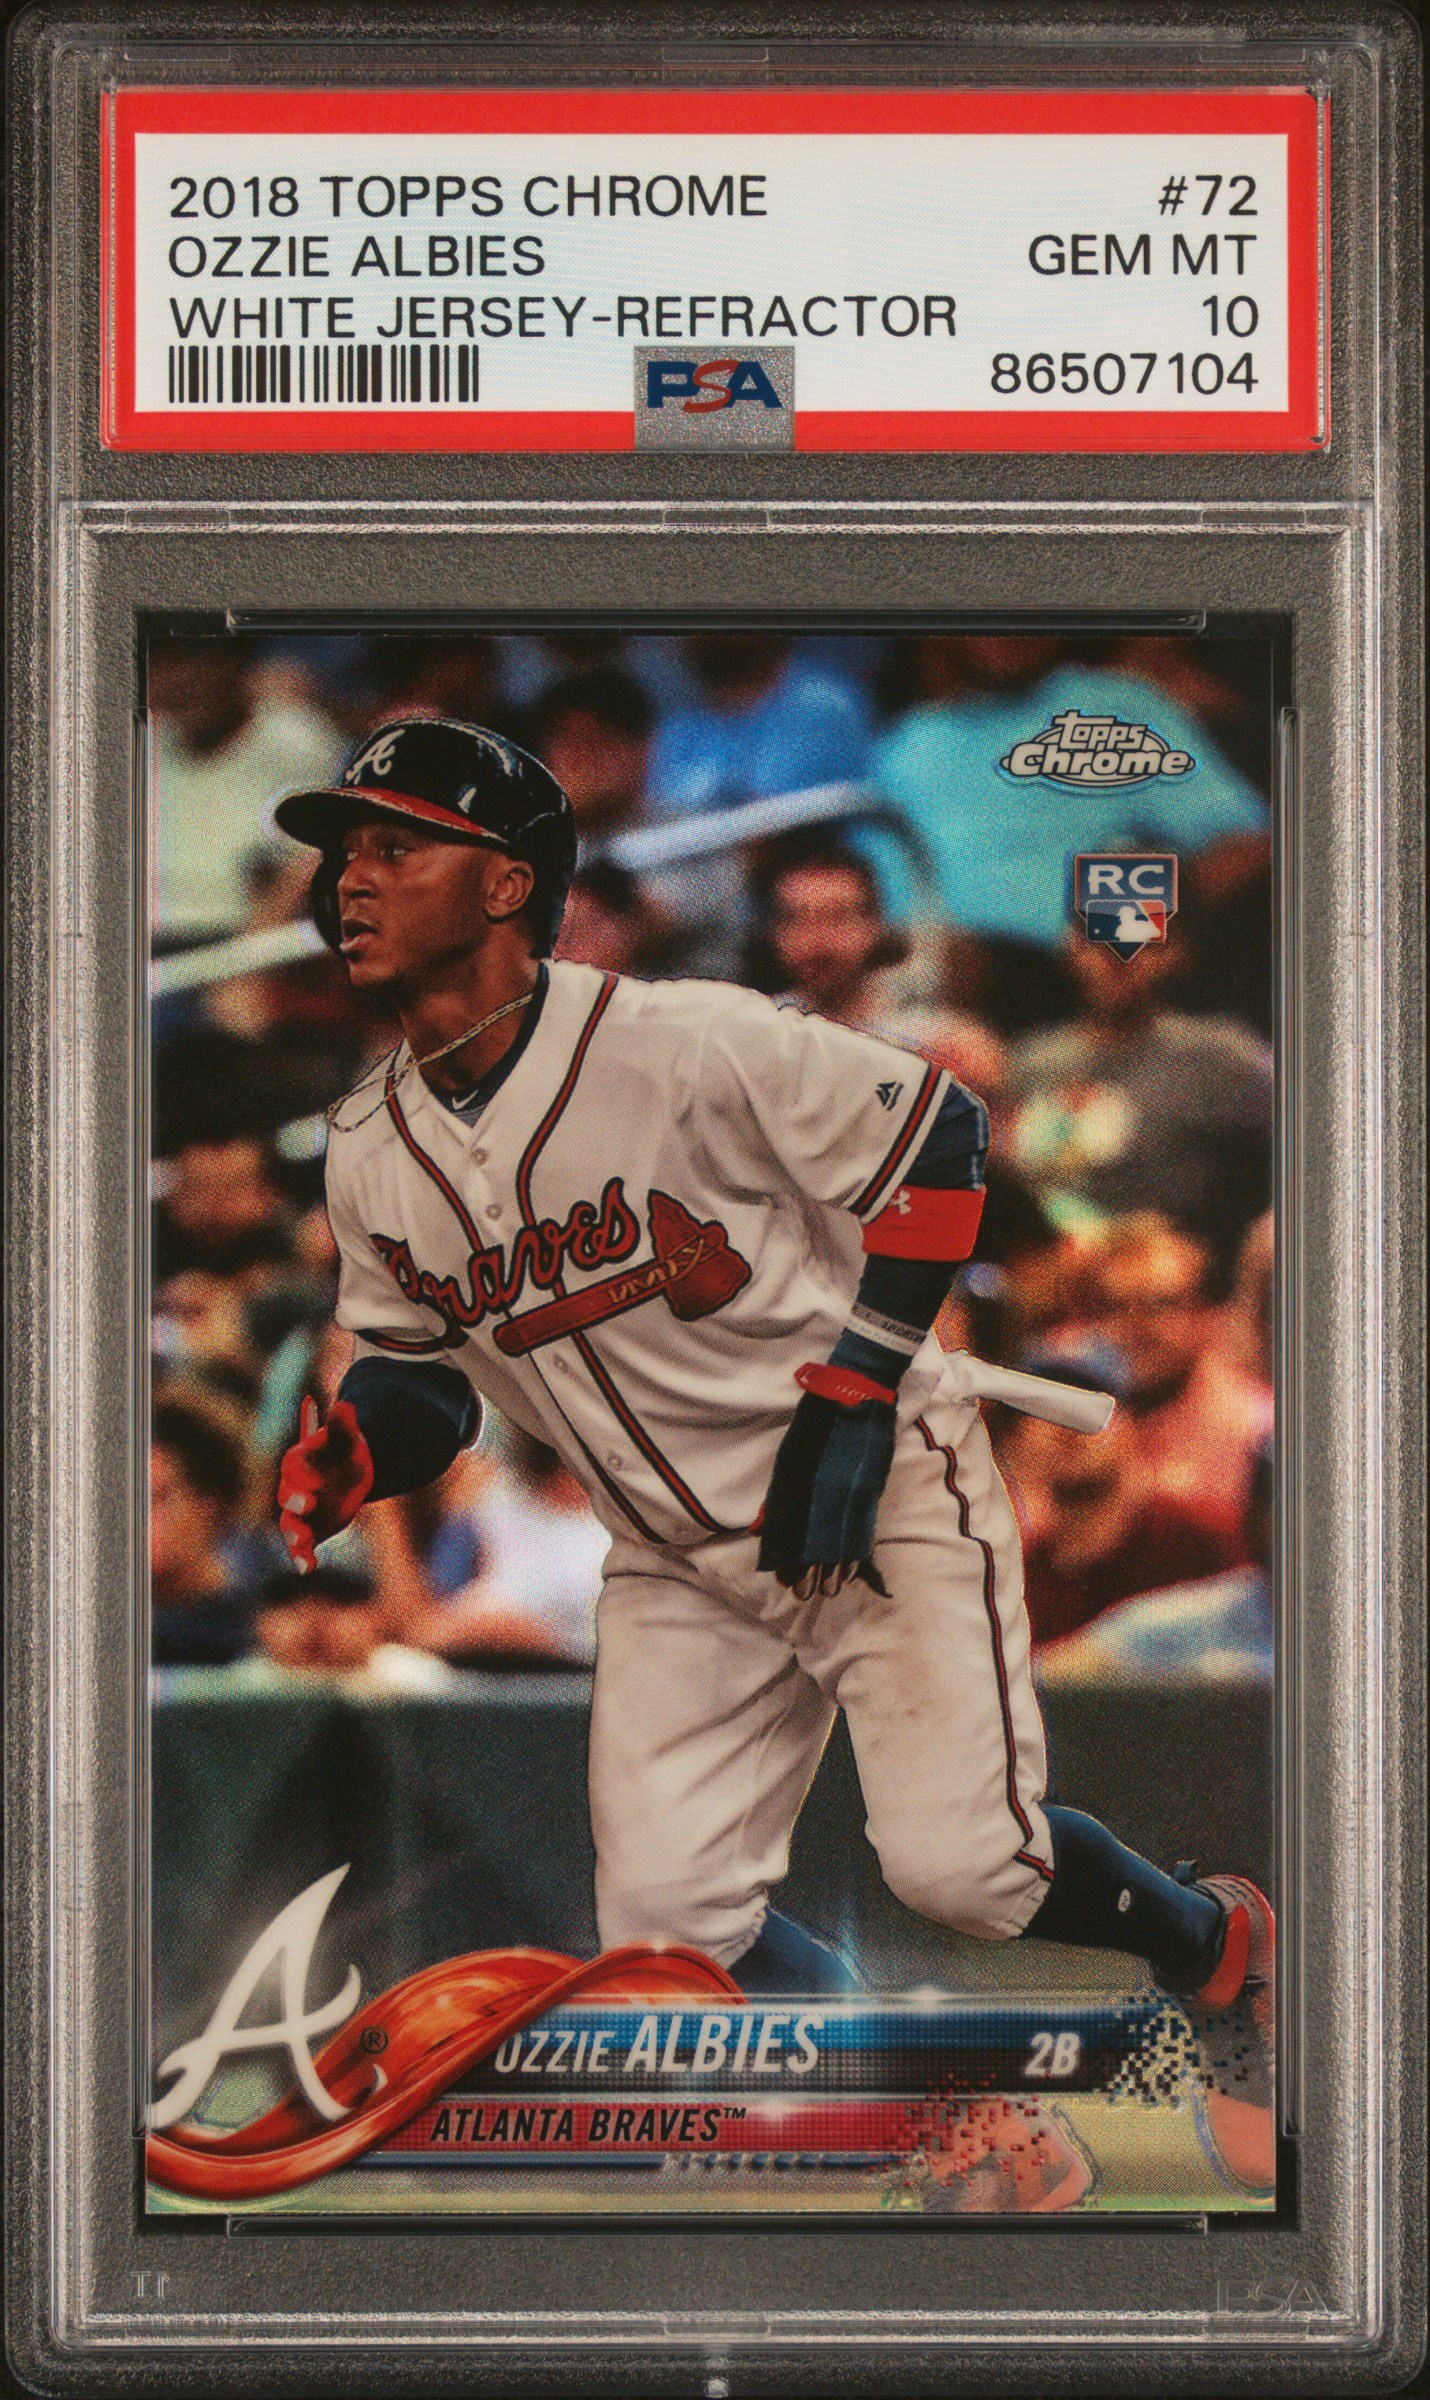 2018 Topps Chrome White Jersey-Refractor #72 Ozzie Albies PSA 10